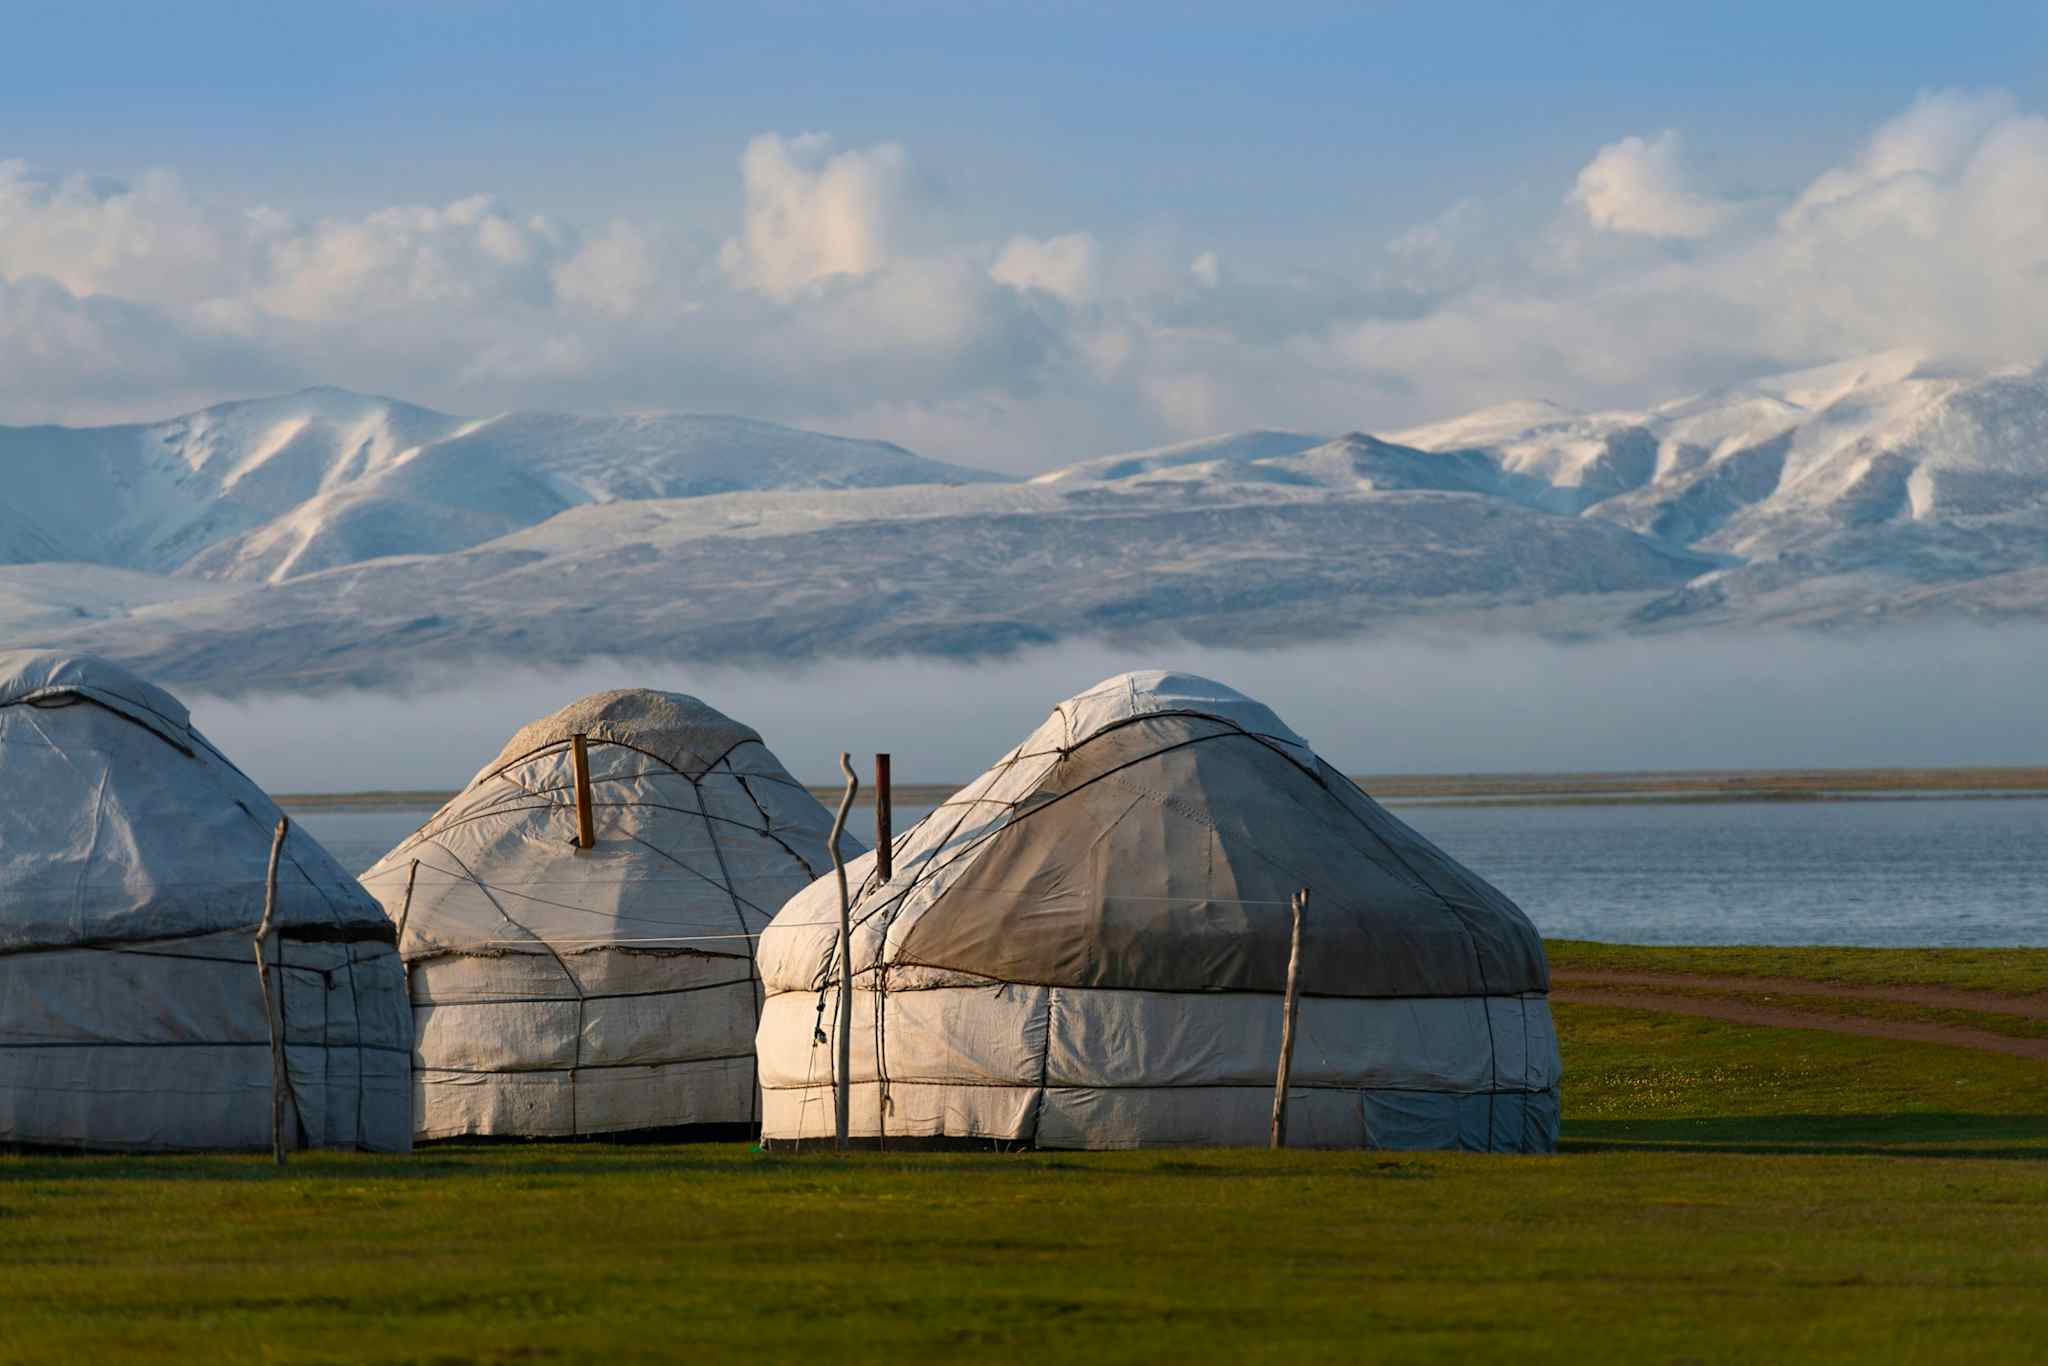 Three yurts by Son Kul lake with mountains in the background in Kyrgyzstan